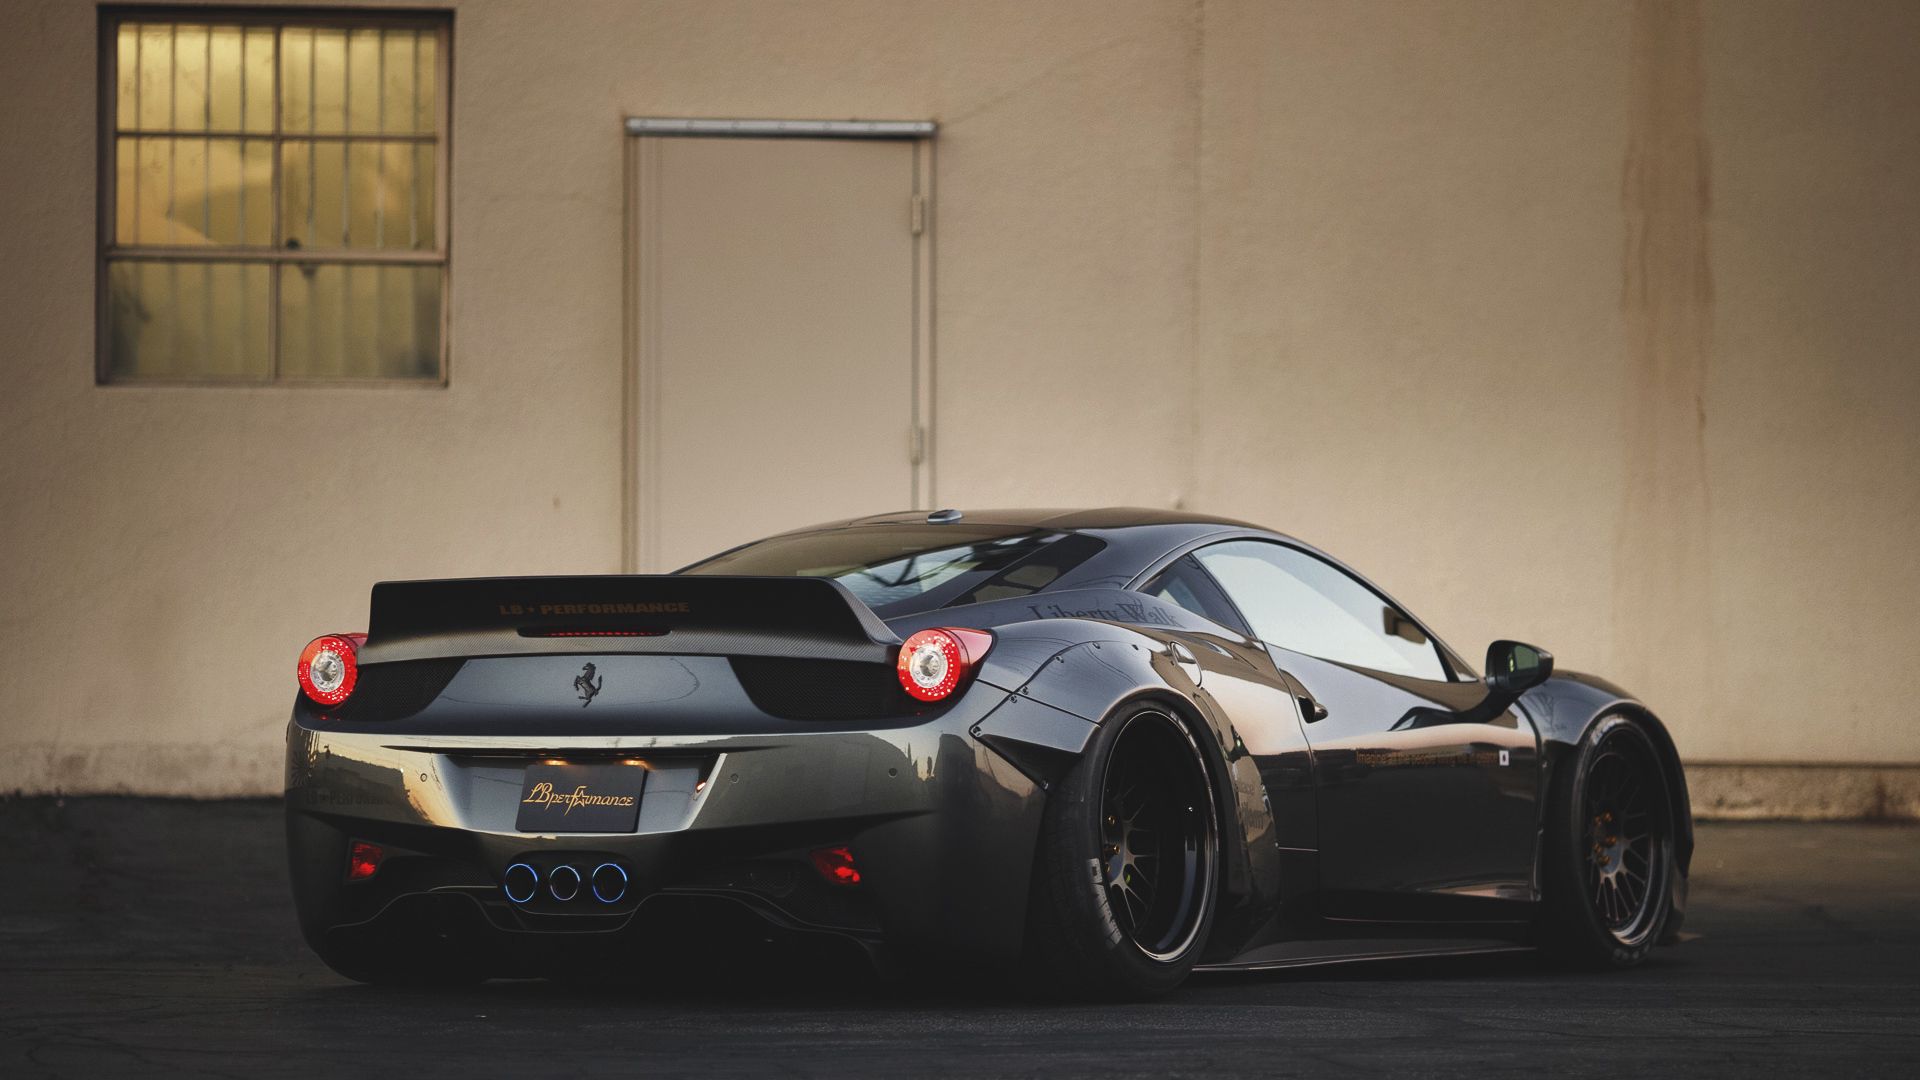 146104 download wallpaper cars, ferrari, back view, rear view, bumper, 458 screensavers and pictures for free